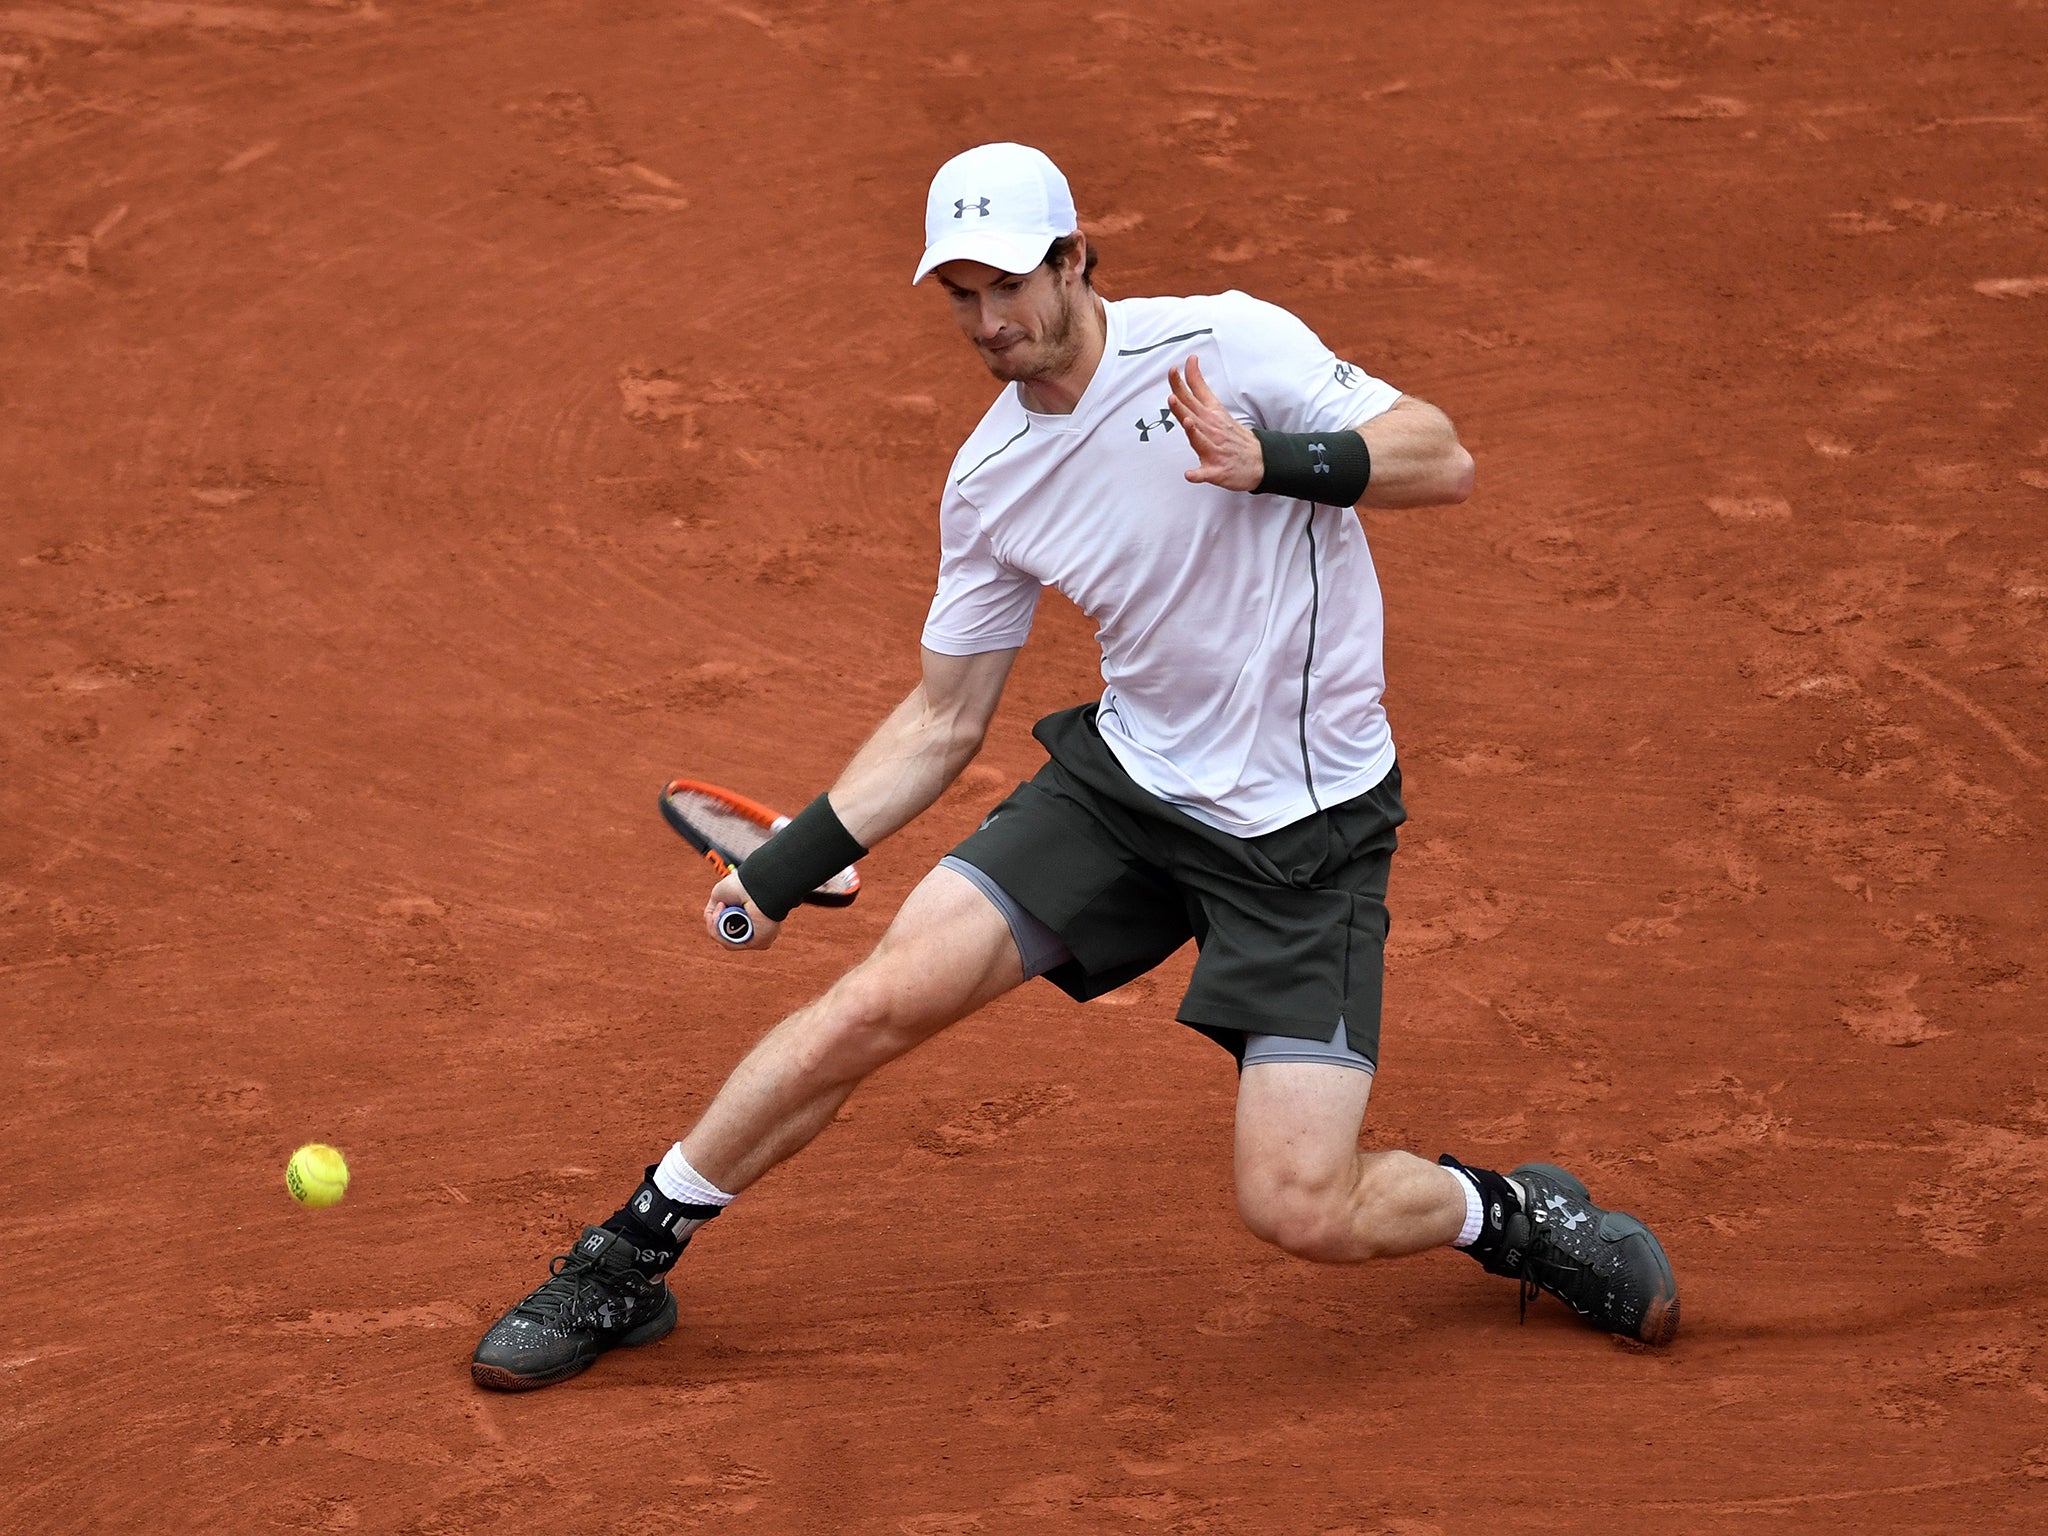 The final will mark a test for Murray to prove he can beat the best on clay when the stakes are high